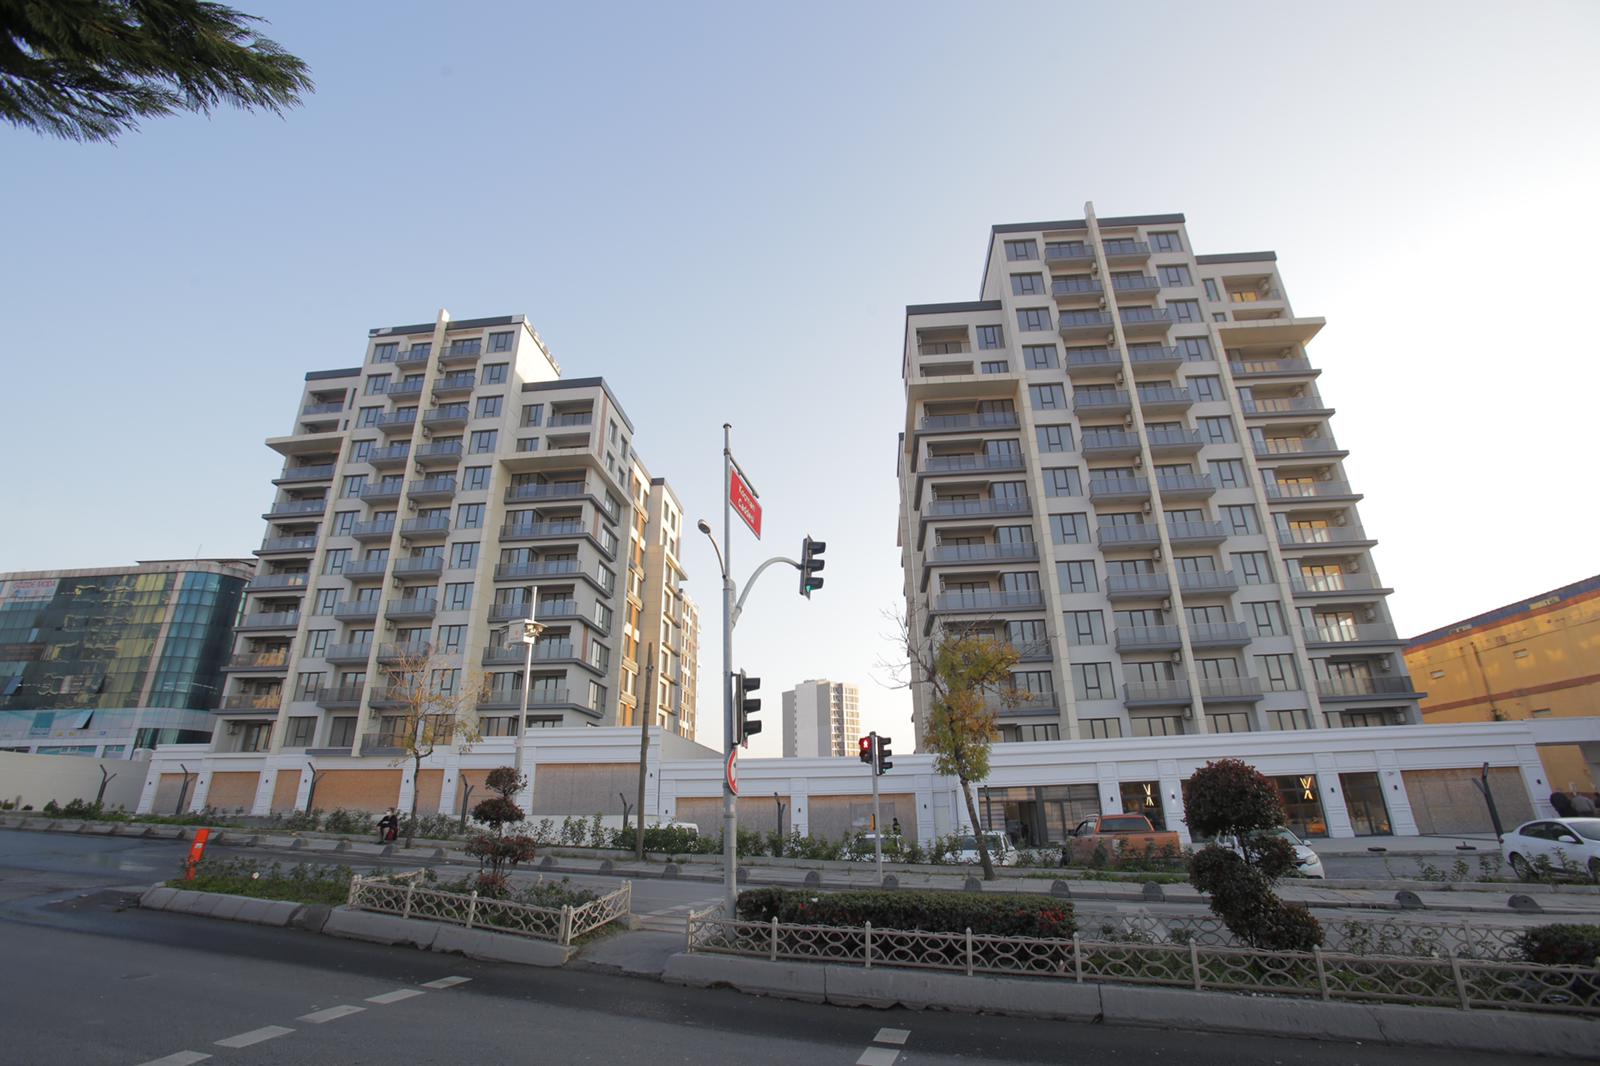 New Homes for Sale in Istanbul 8